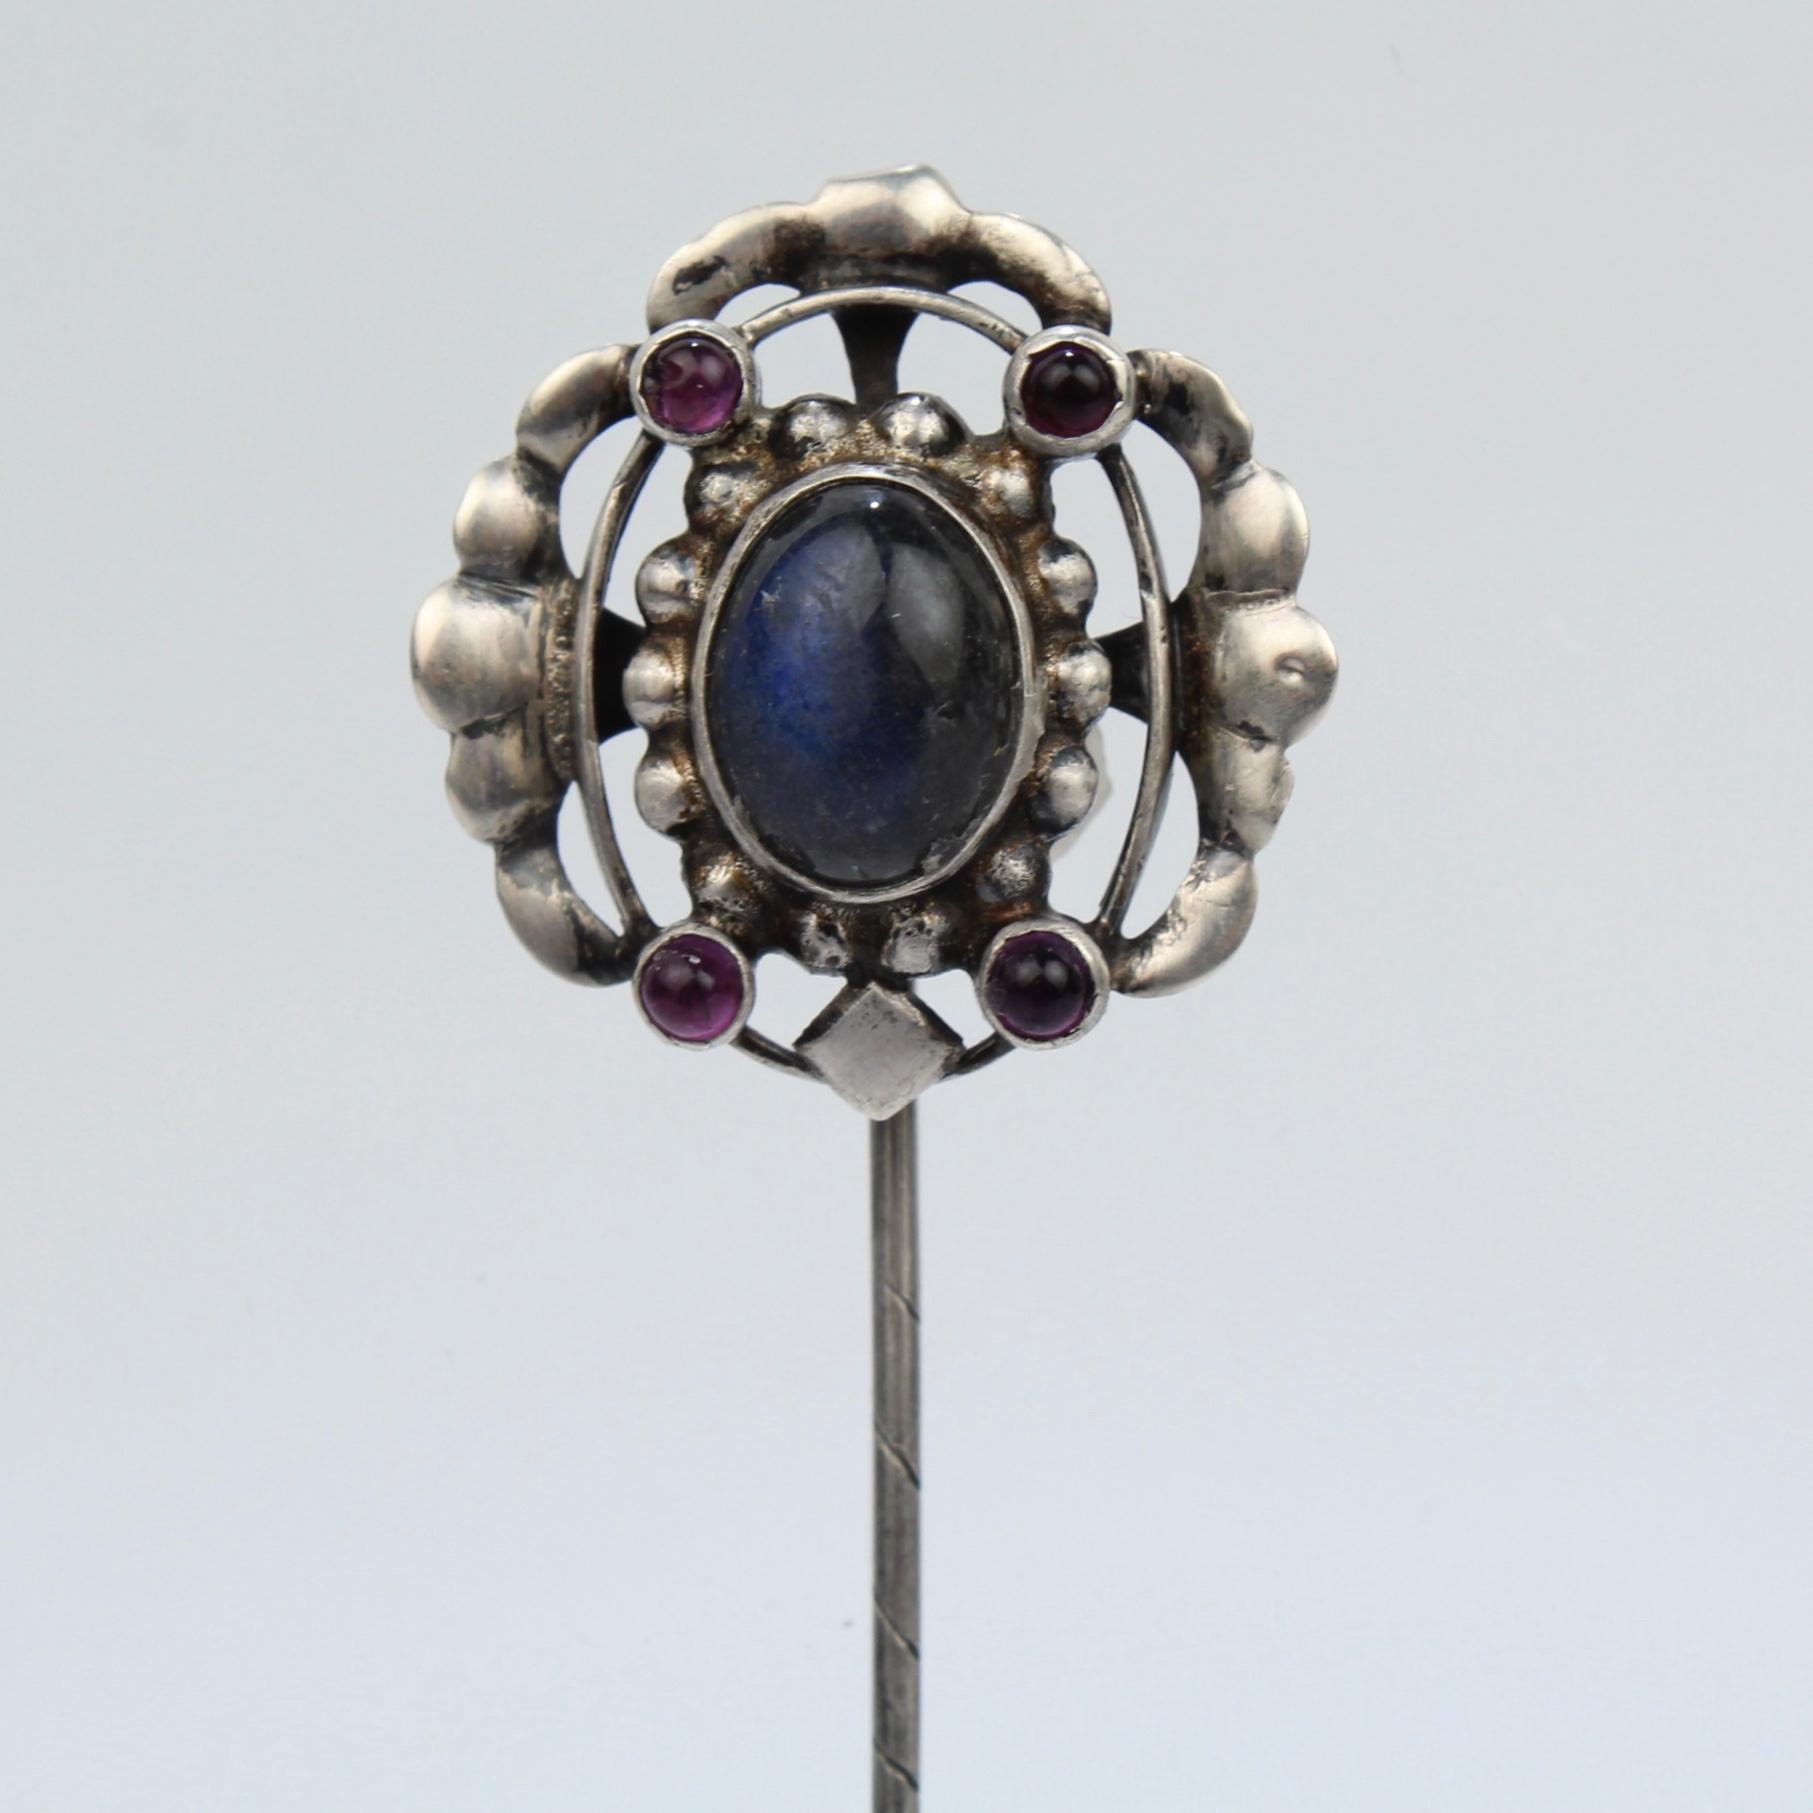 Art Deco Georg Jensen 830 Silver Stick Pin No. 17 with Labradorite and Amethysts 1